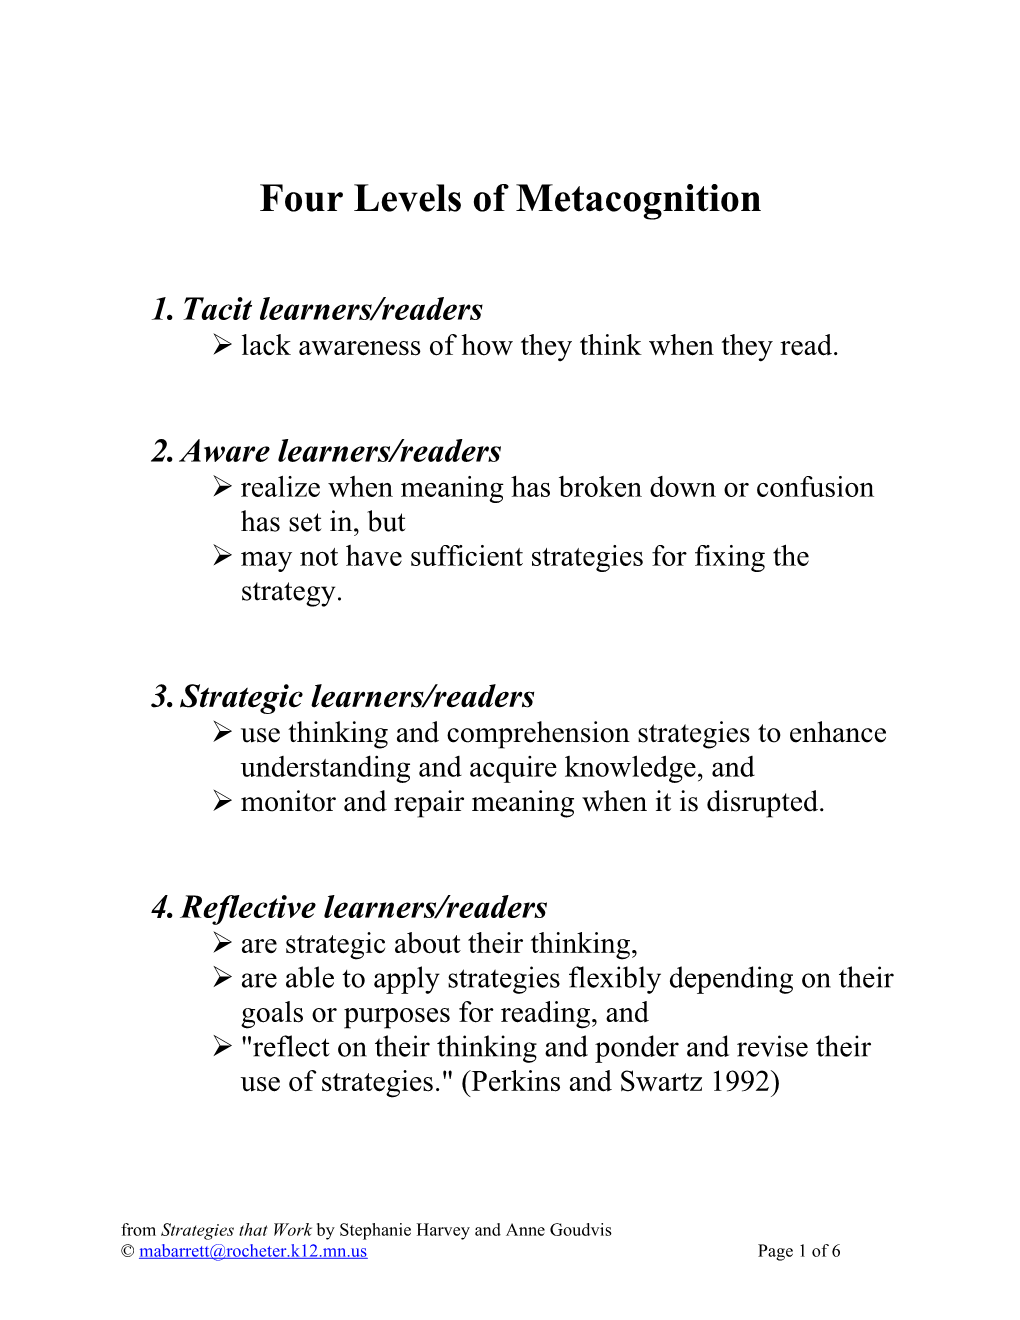 Four Levels of Metacognition